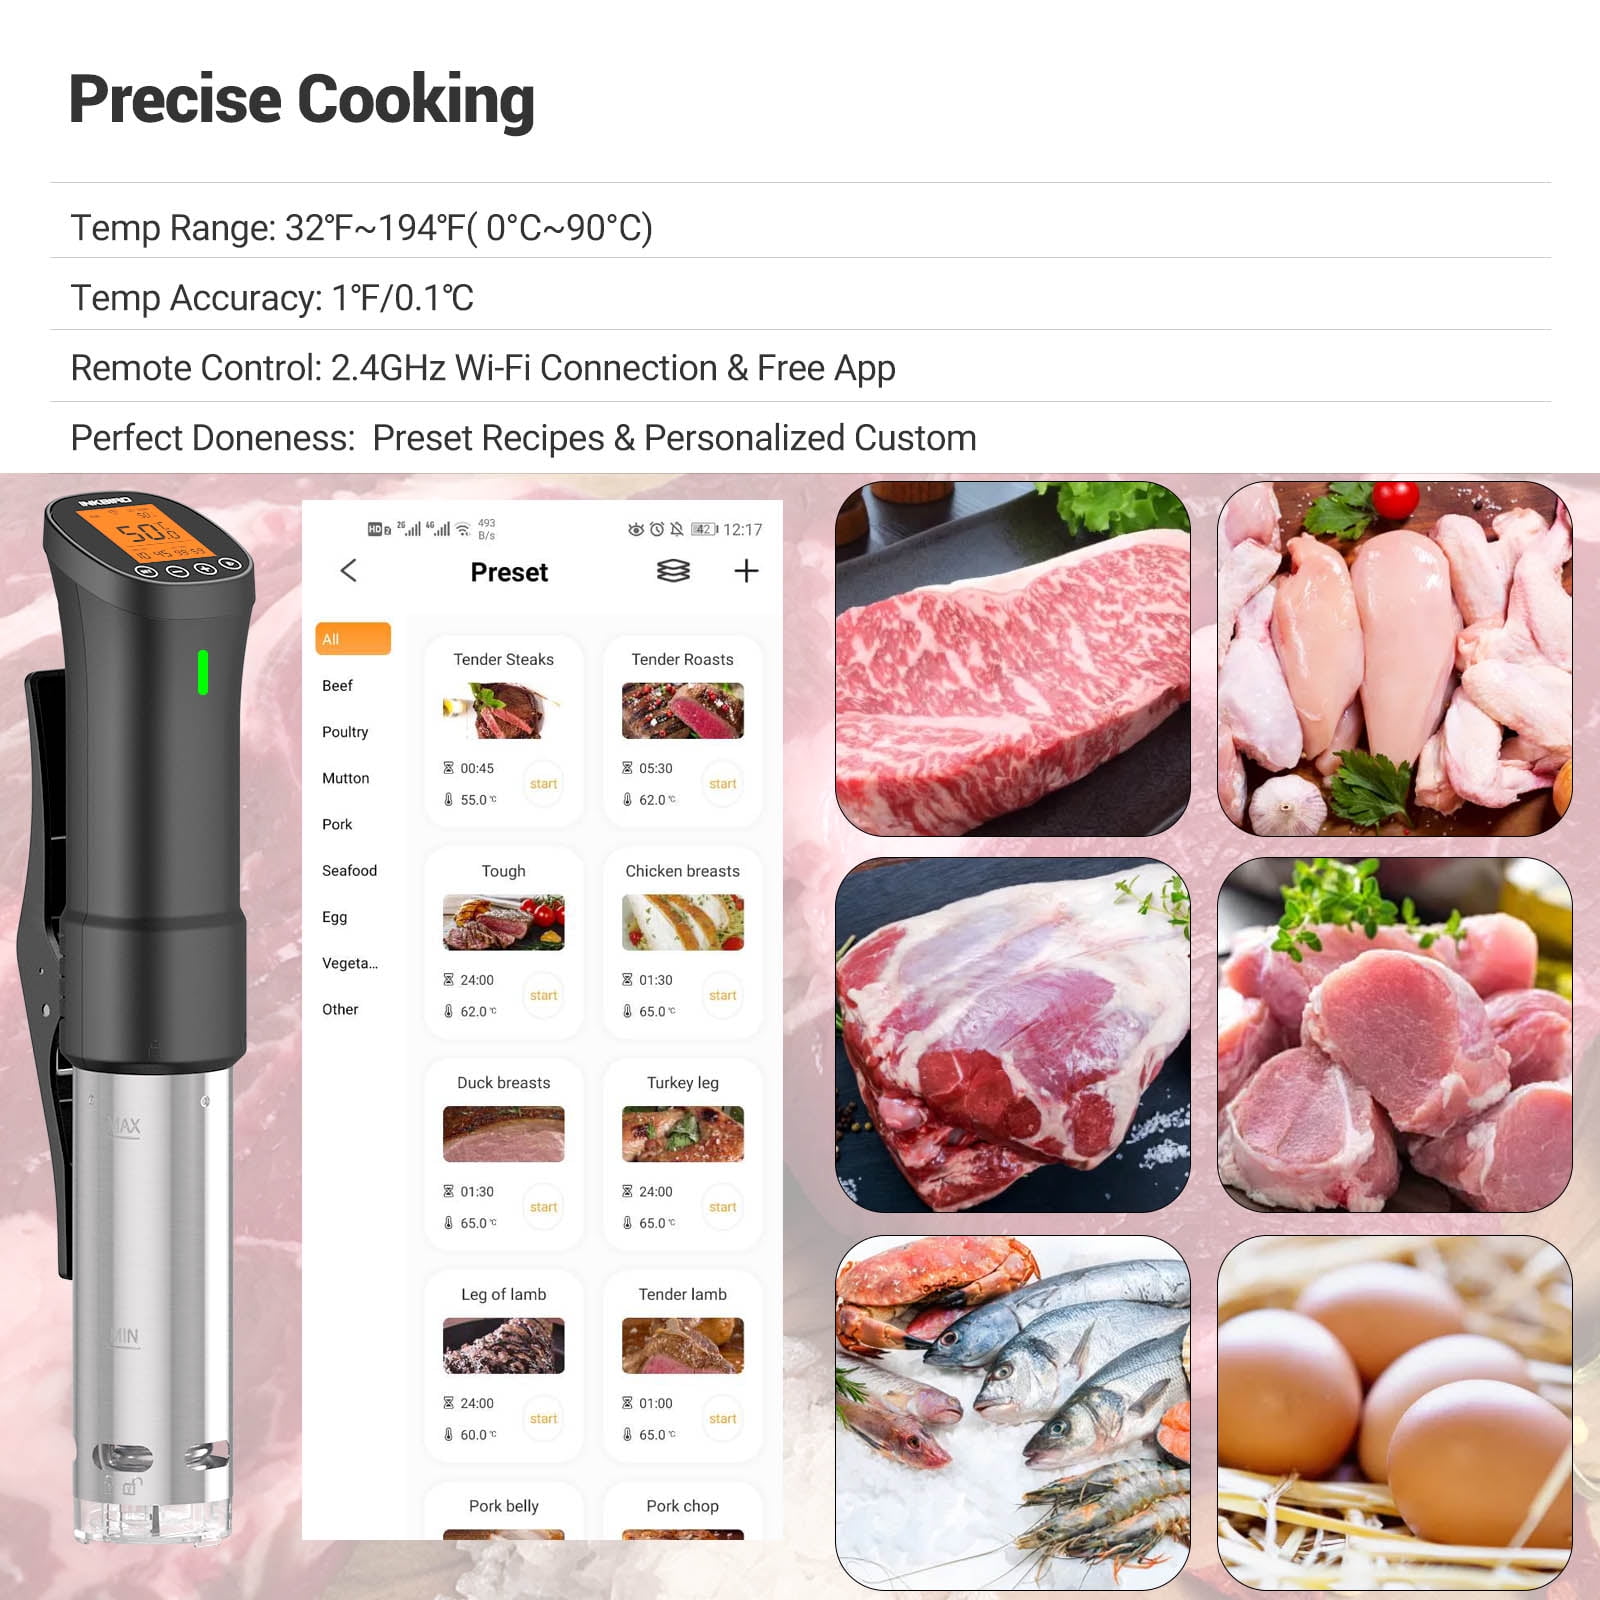 Inkbird Wi-Fi Sous Vide Vacuum Cooking Immersion Heater 1000W Slow Cooker  LCD Full Touch Screen Smart Life Kitchen Appliances